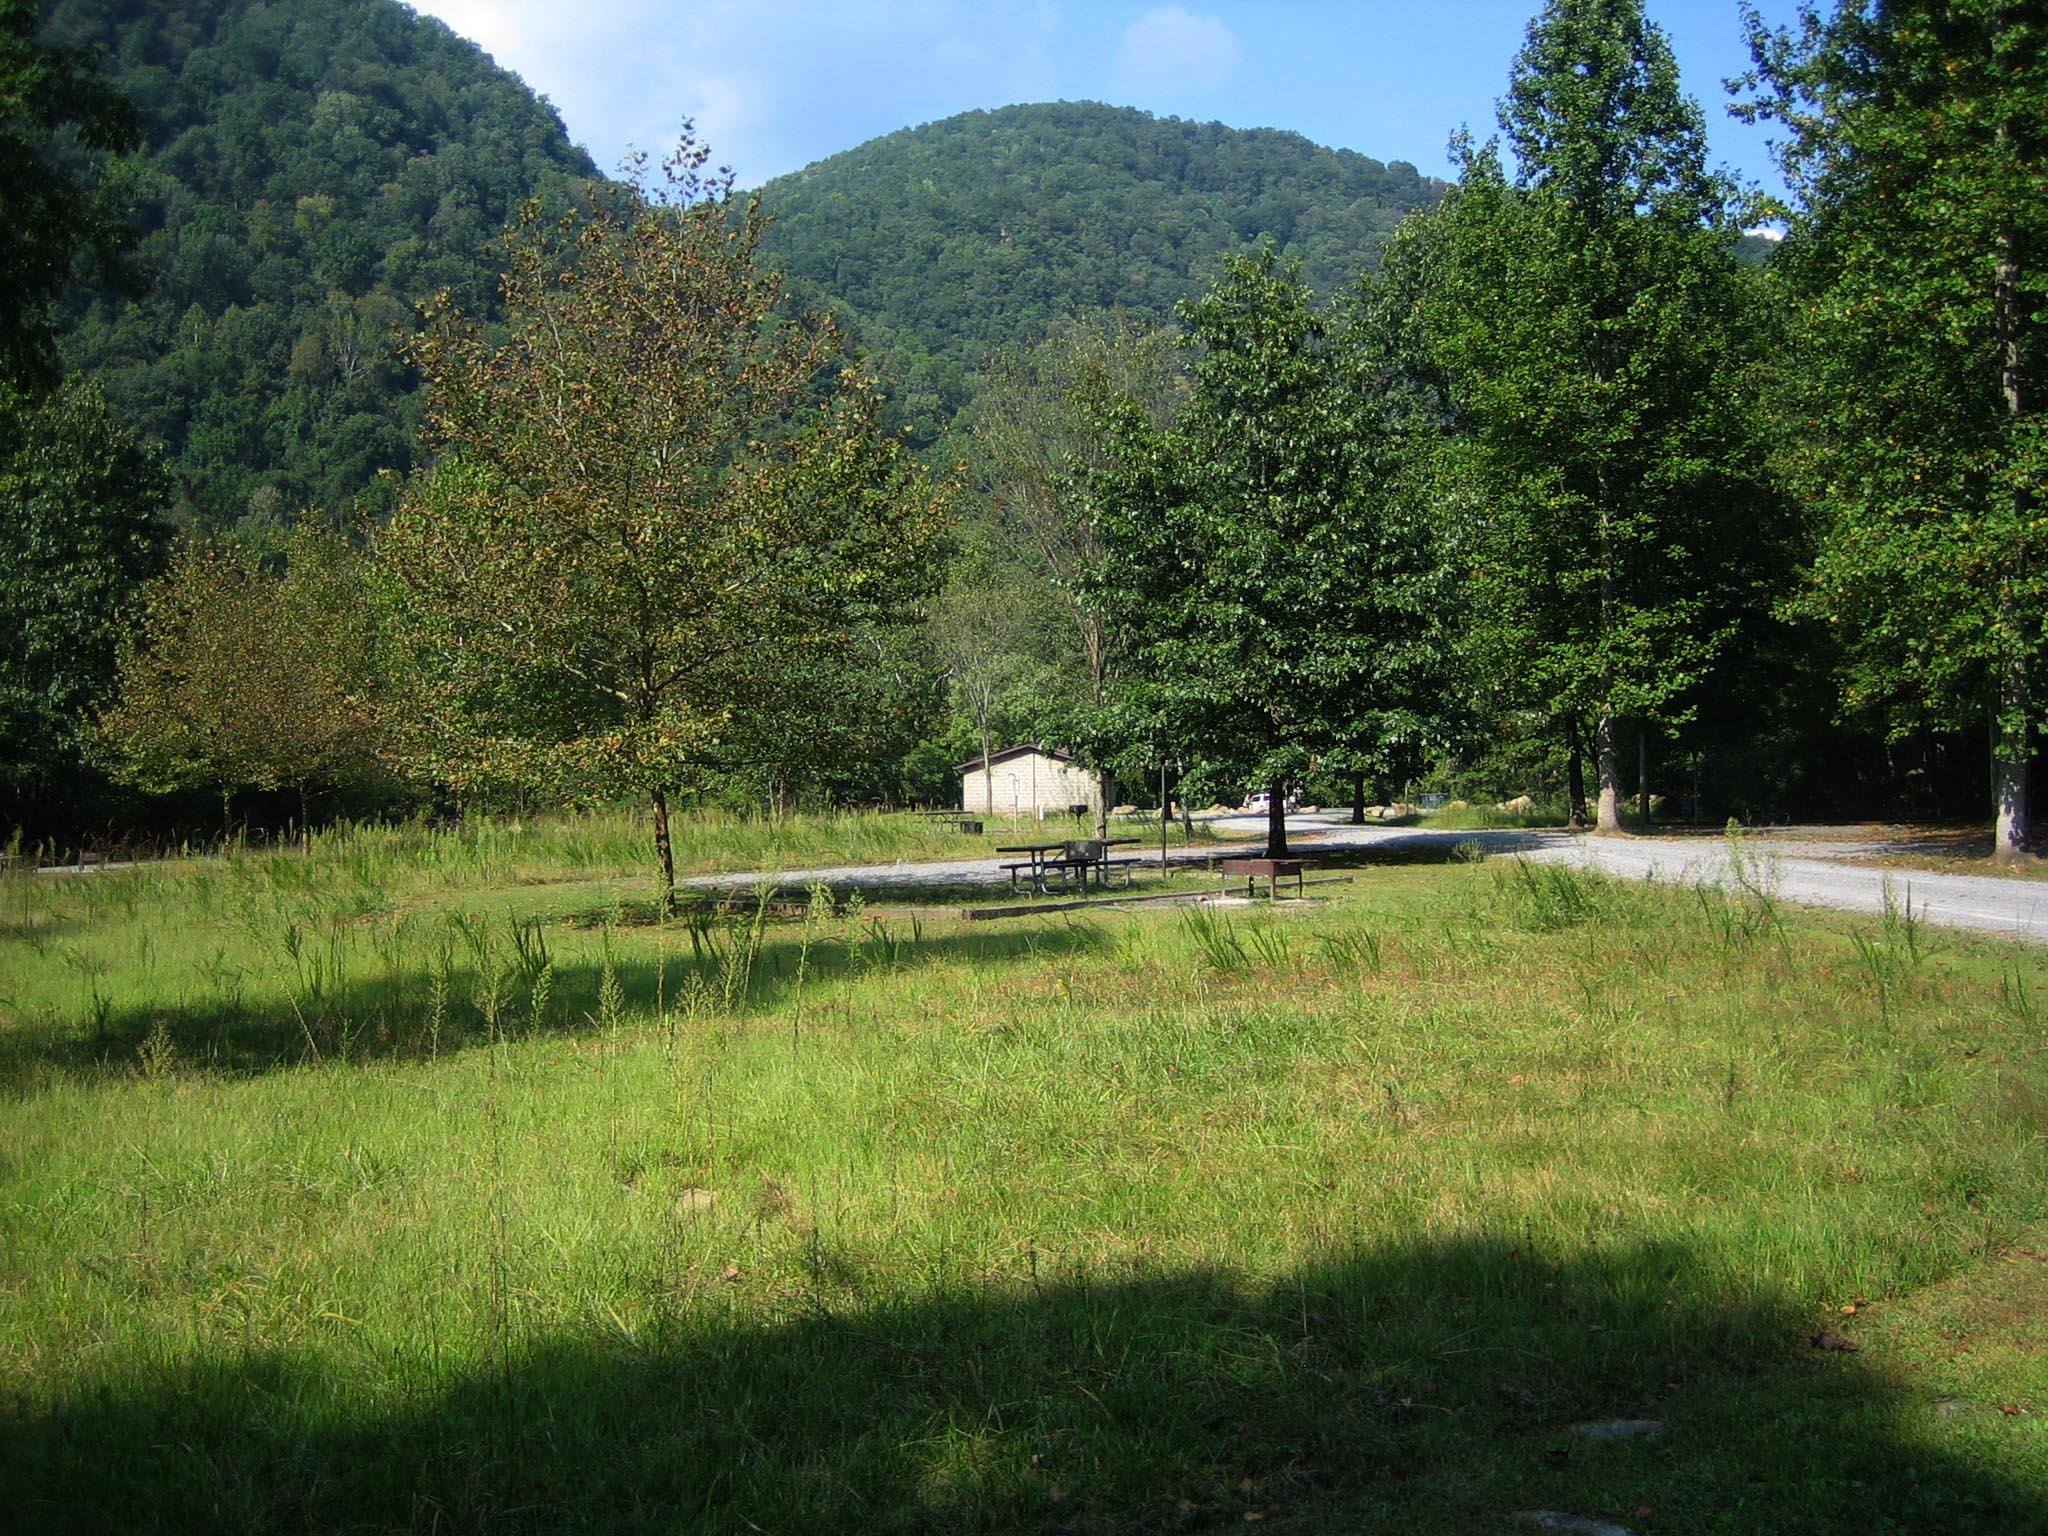 A grassy field with a few trees, campsites, and restroom facility in it